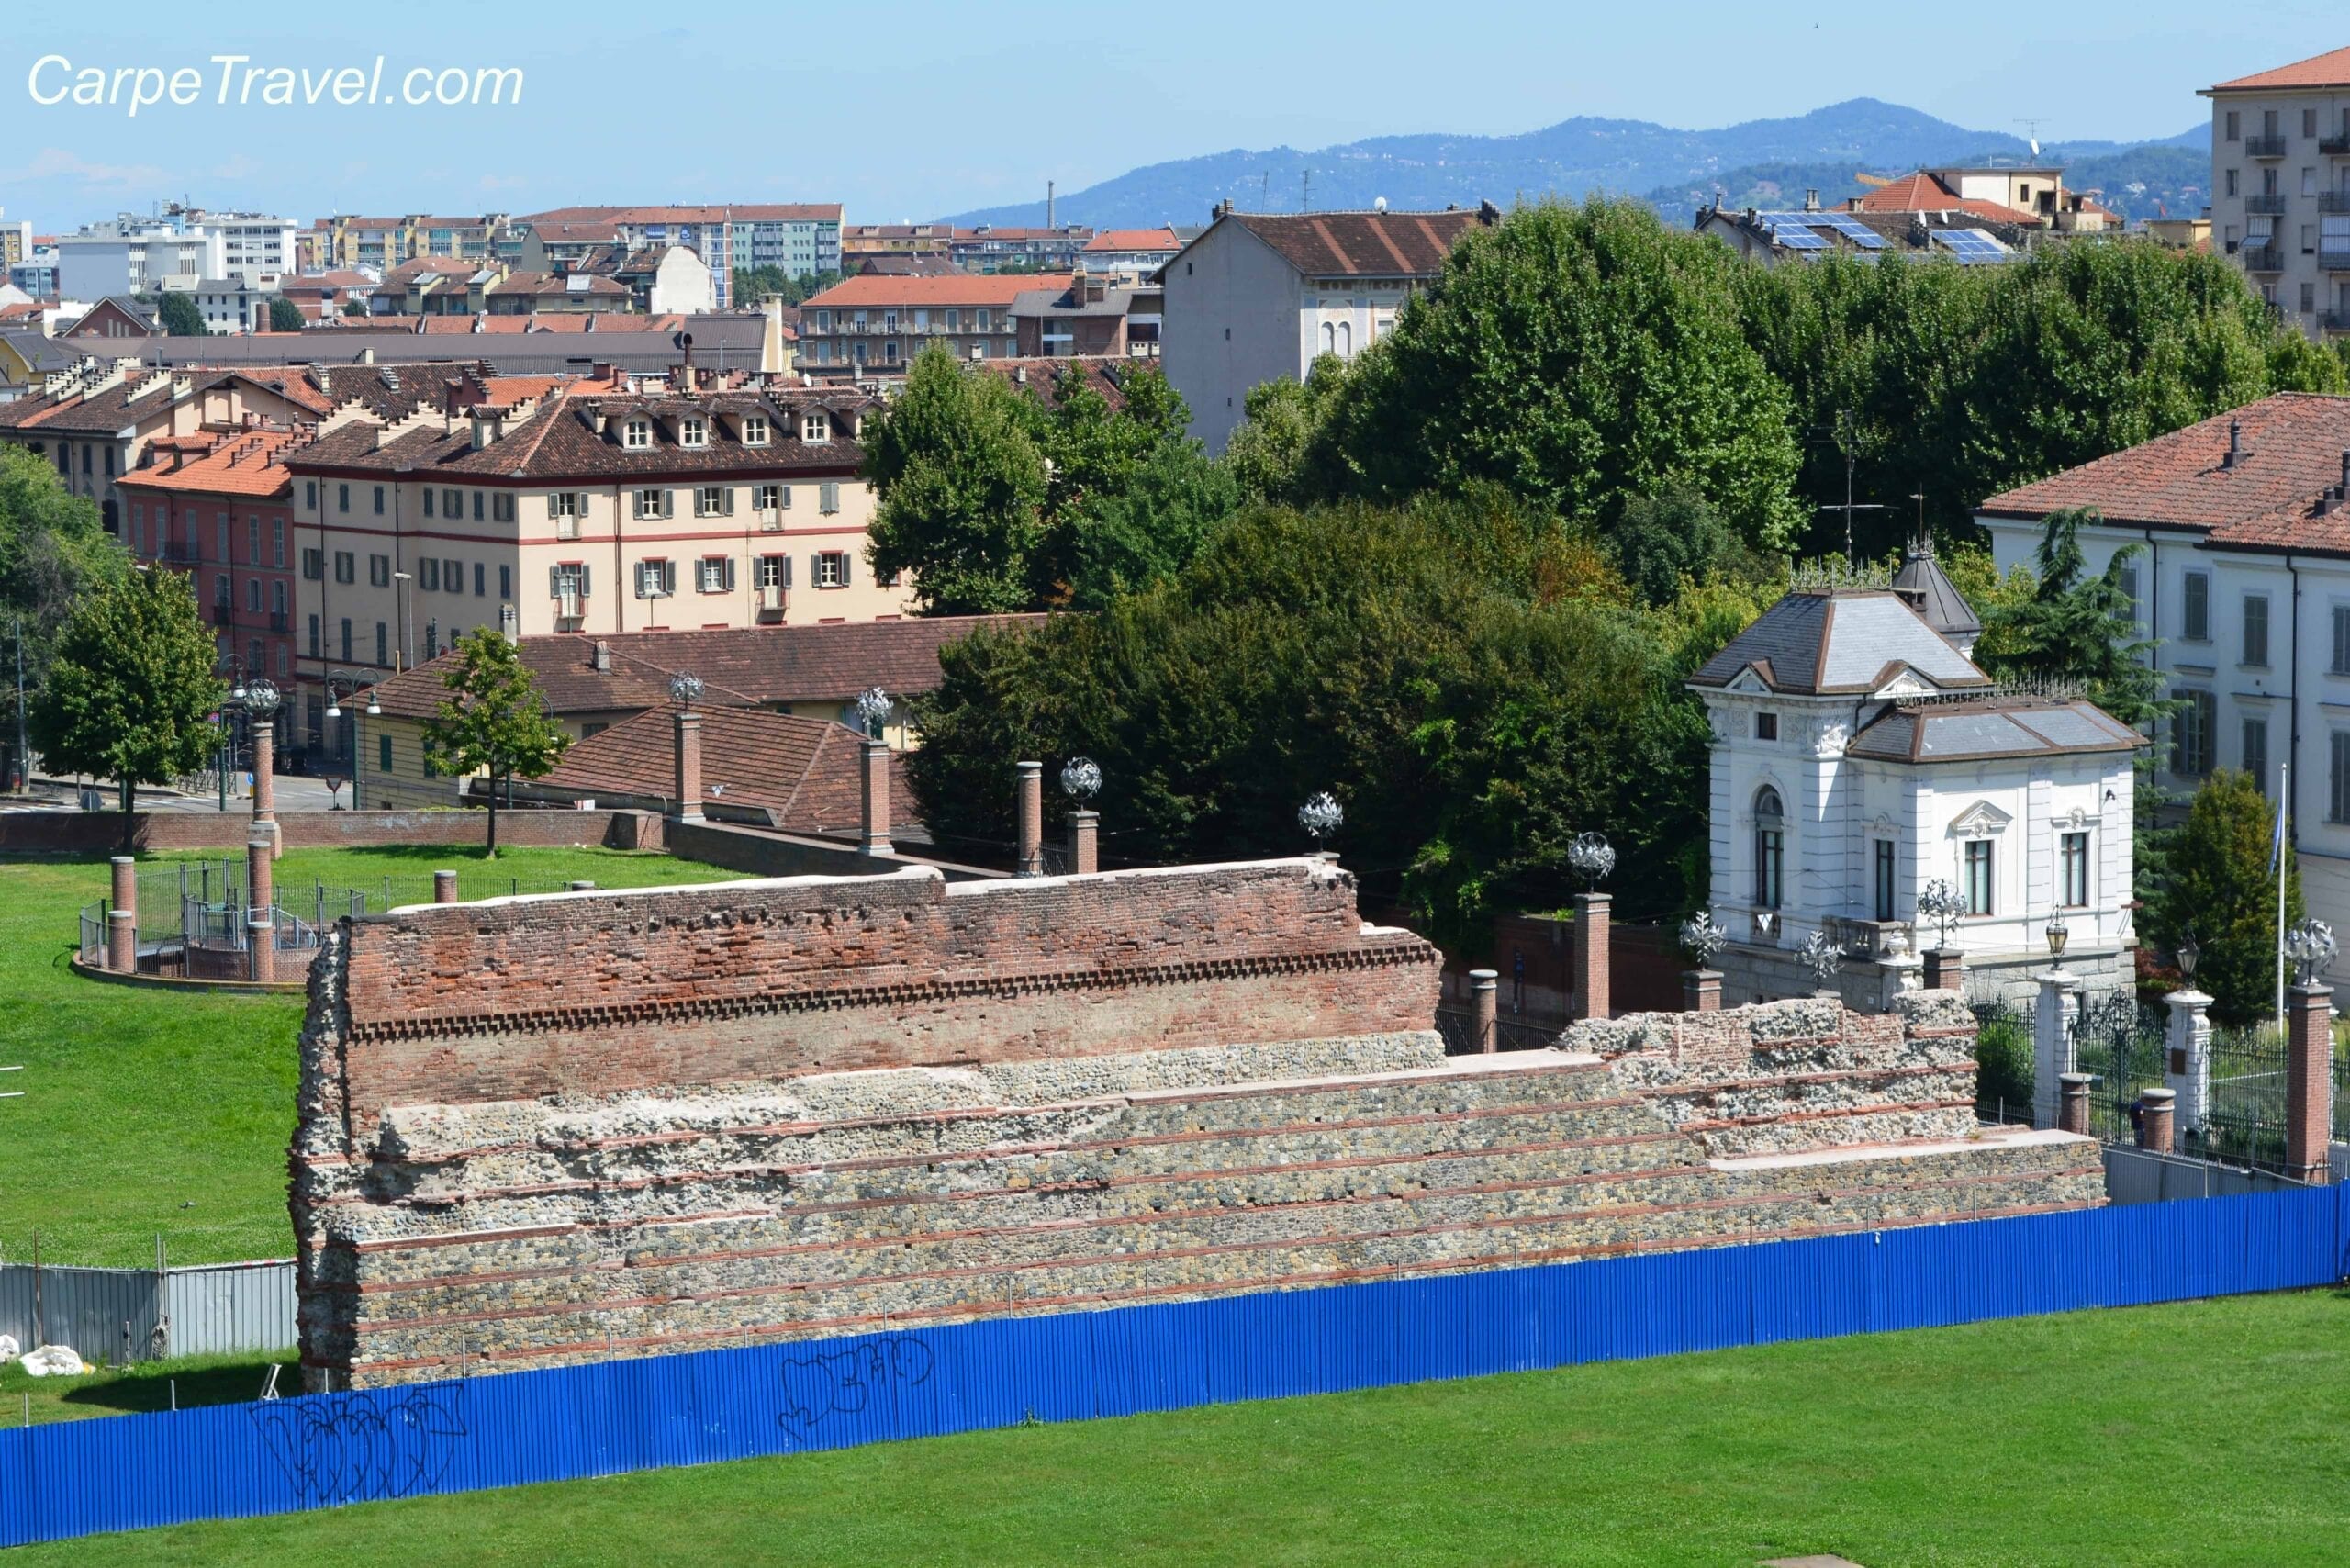 Things to do in Turin see roman ruins